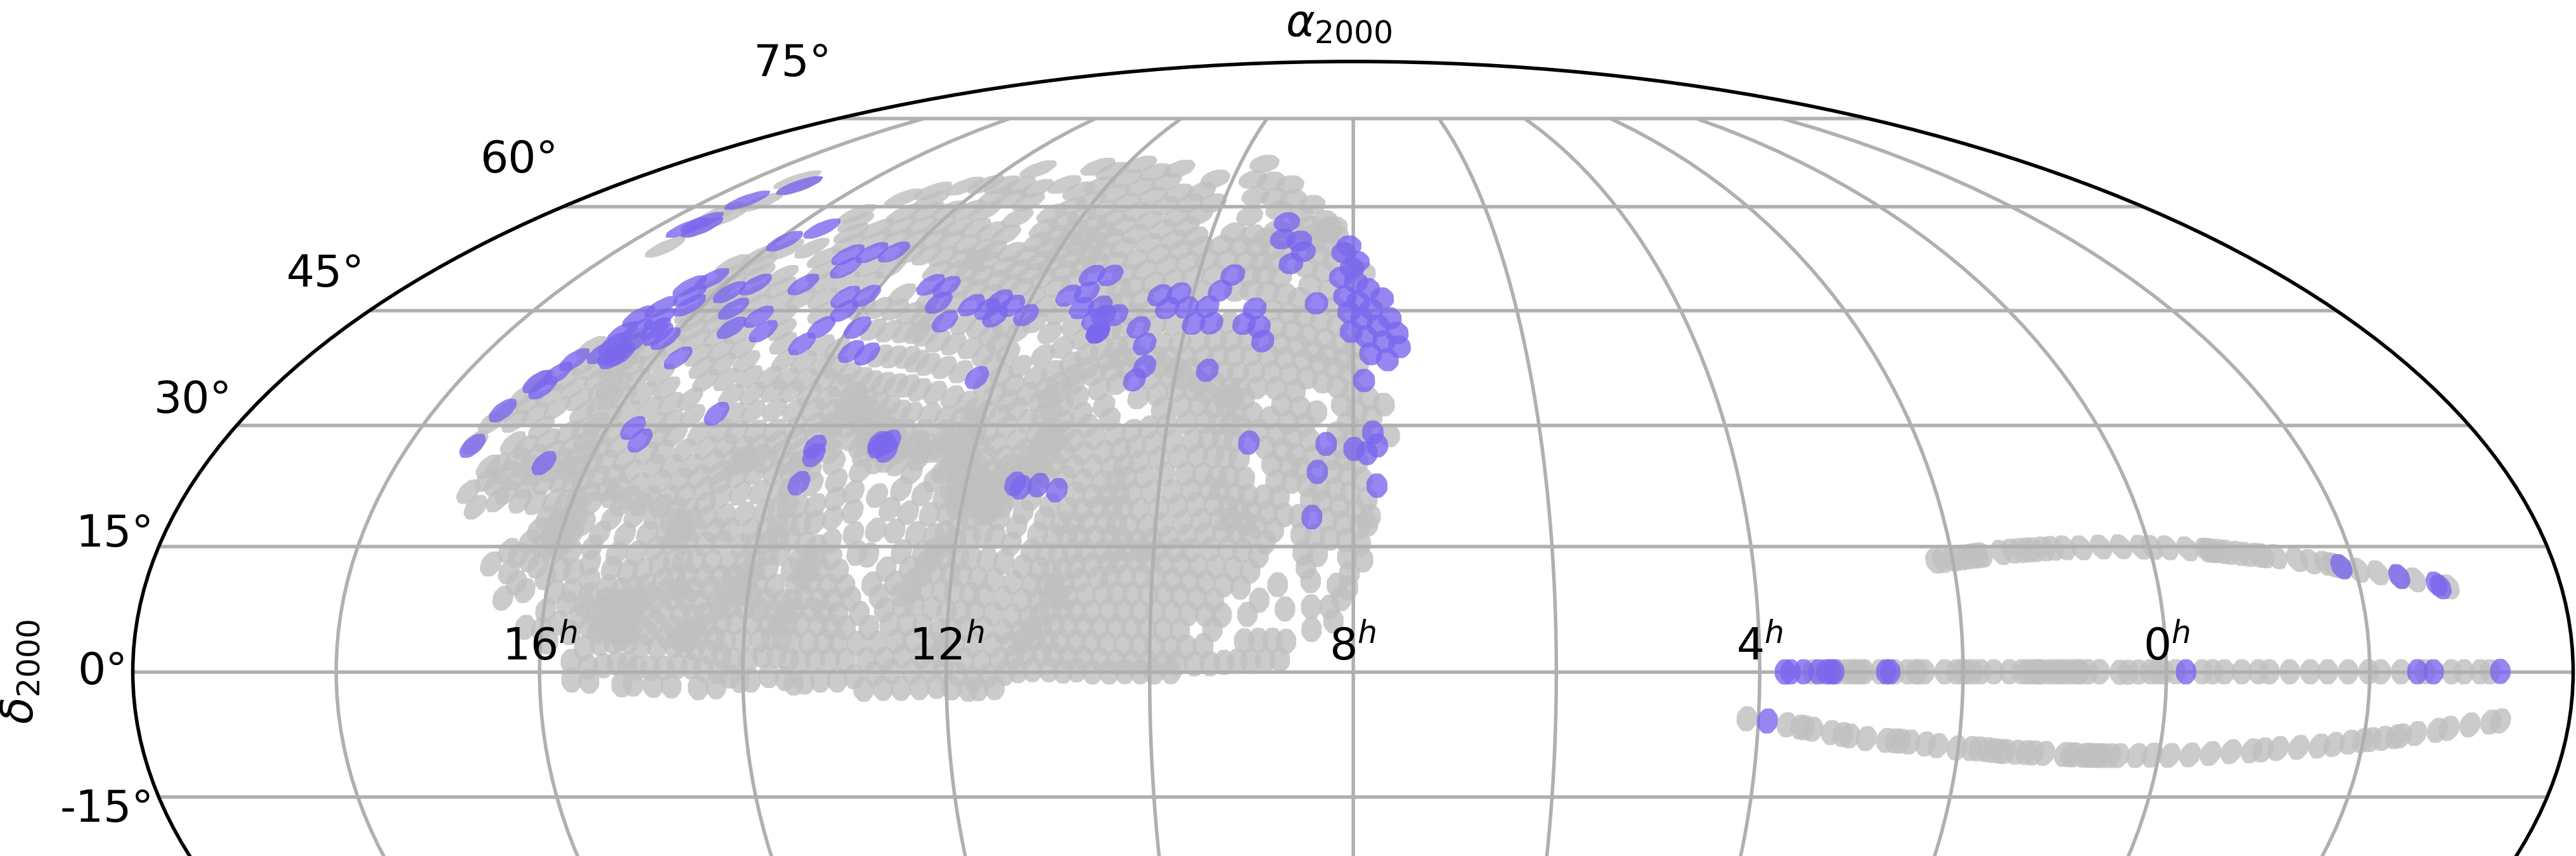 DR15 MaNGA spectroscopic coverage: observed plates are shown in blue.